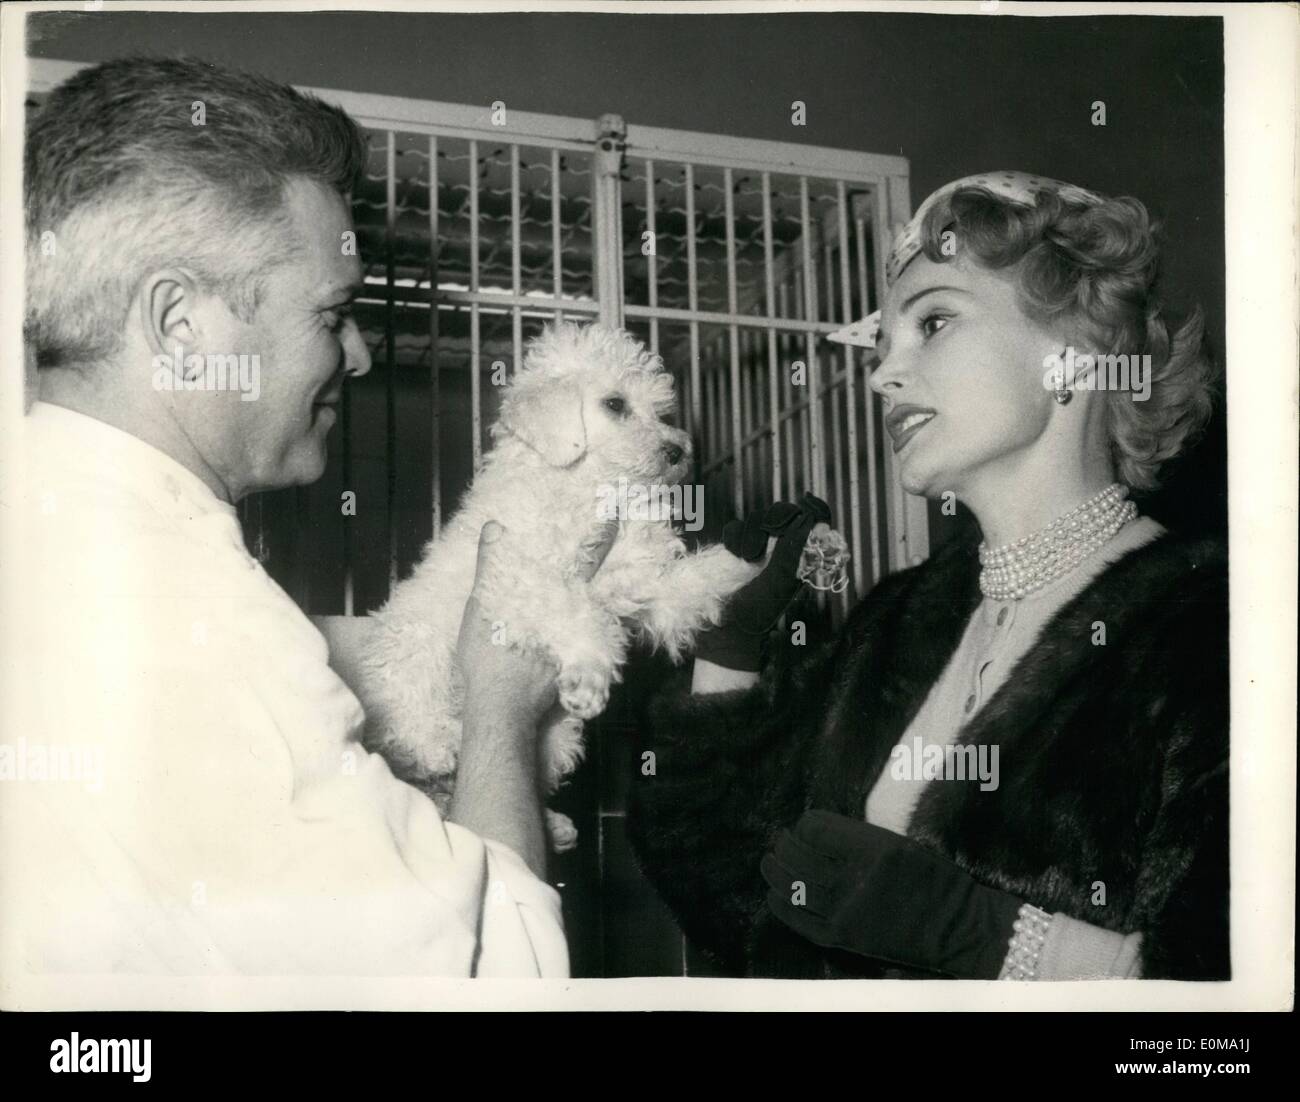 Zsa Zsa Gabor Dog High Resolution Stock Photography and Images - Alamy